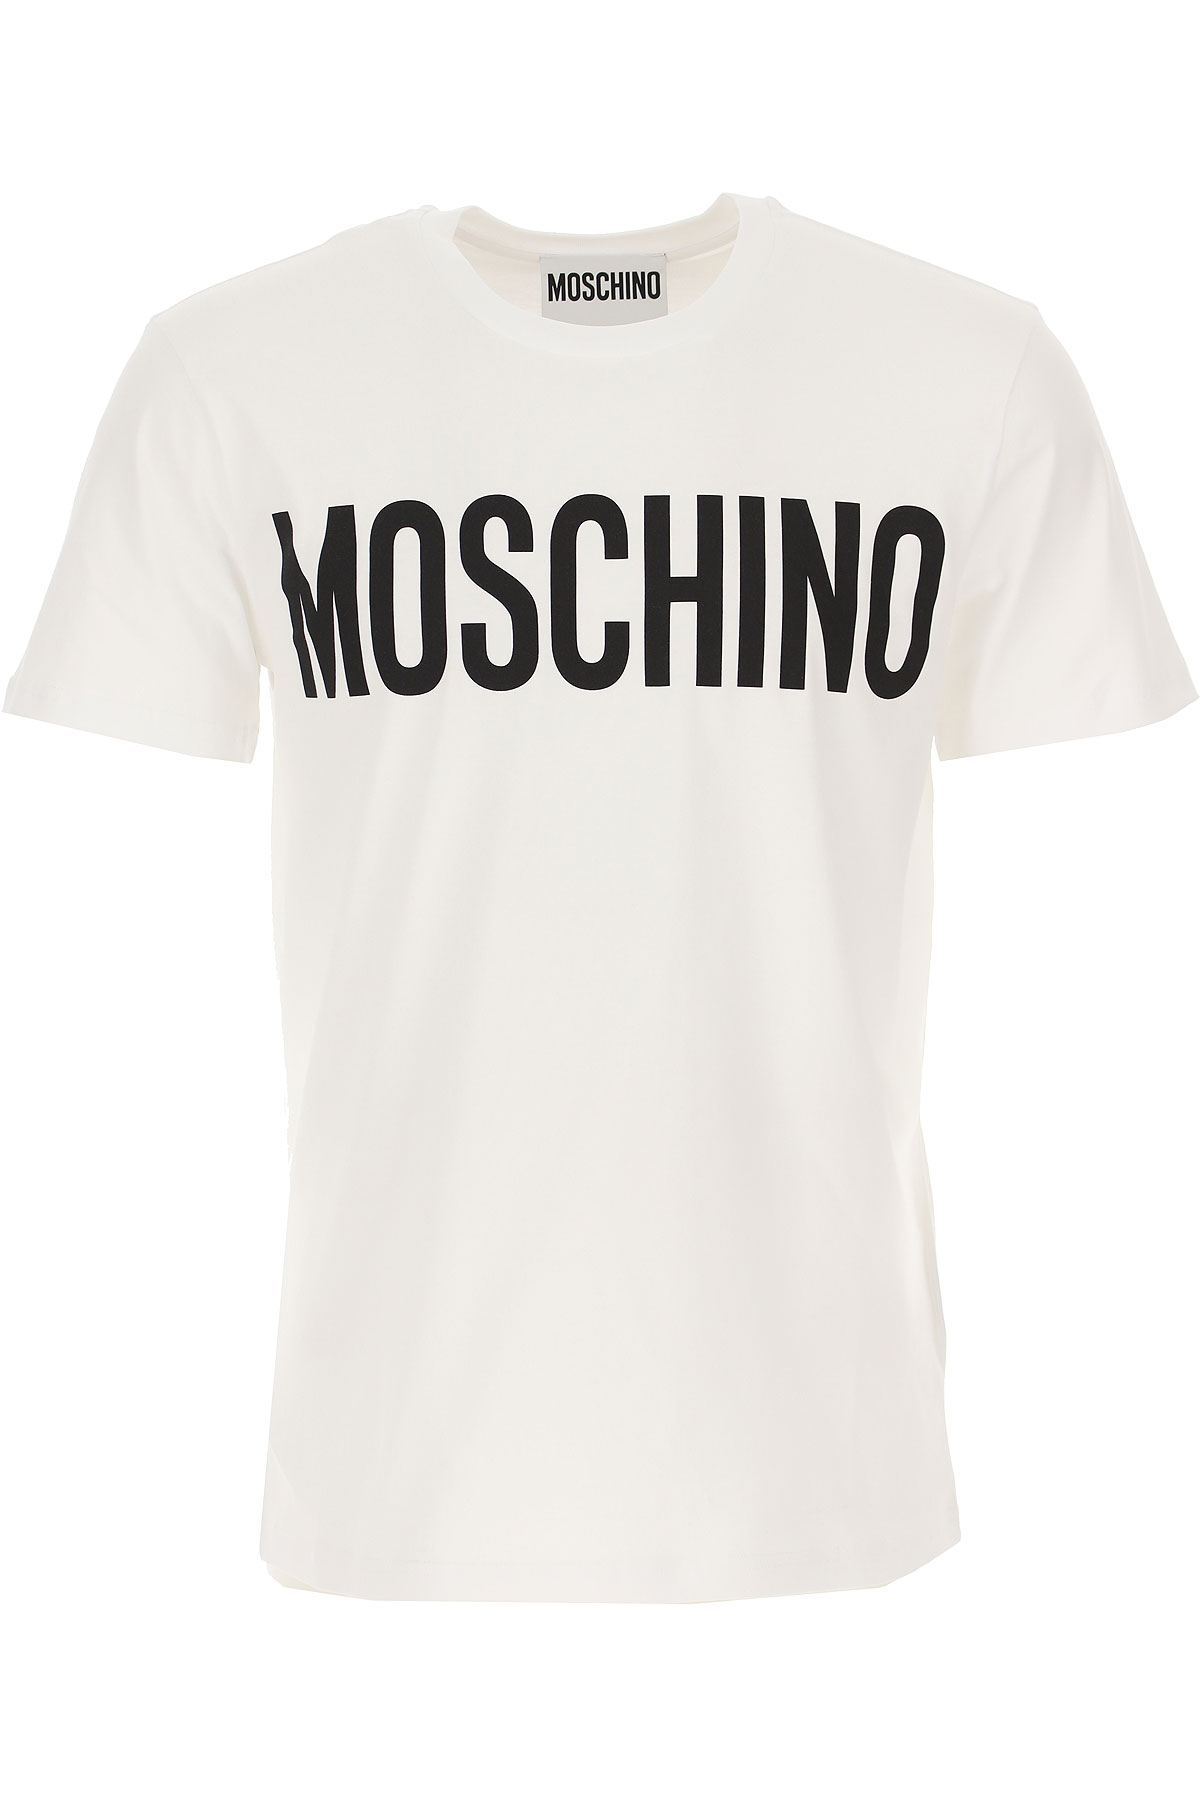 Get the Moschino T-Shirt for Men On 